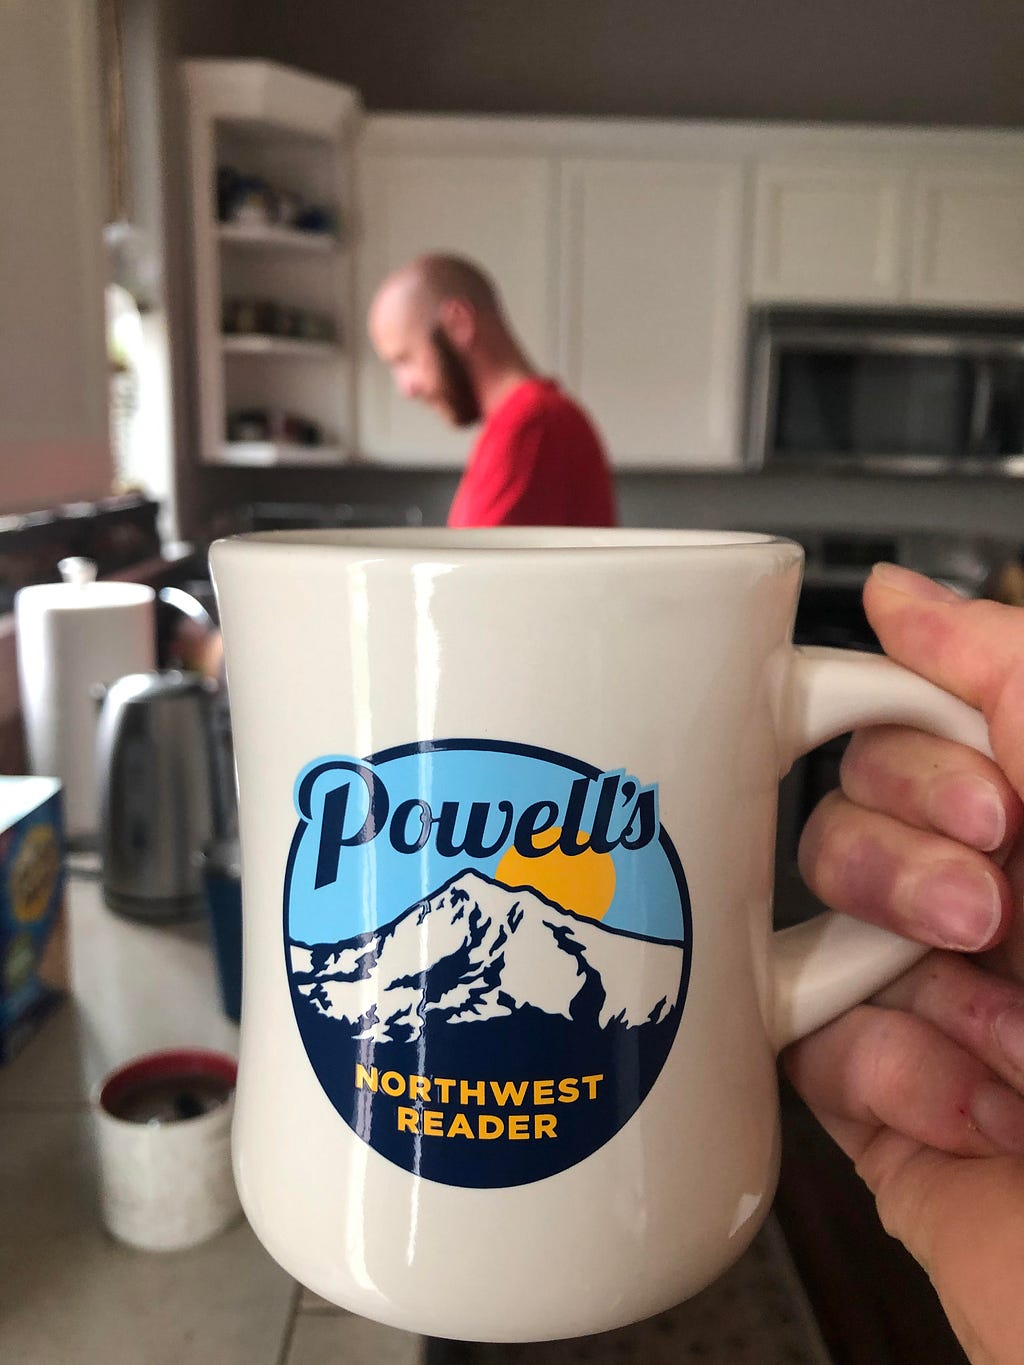 A hand holds a cream diner mug that says “Powell’s Northwest Reader.” Behind, a man in a red shirt stands at the sink